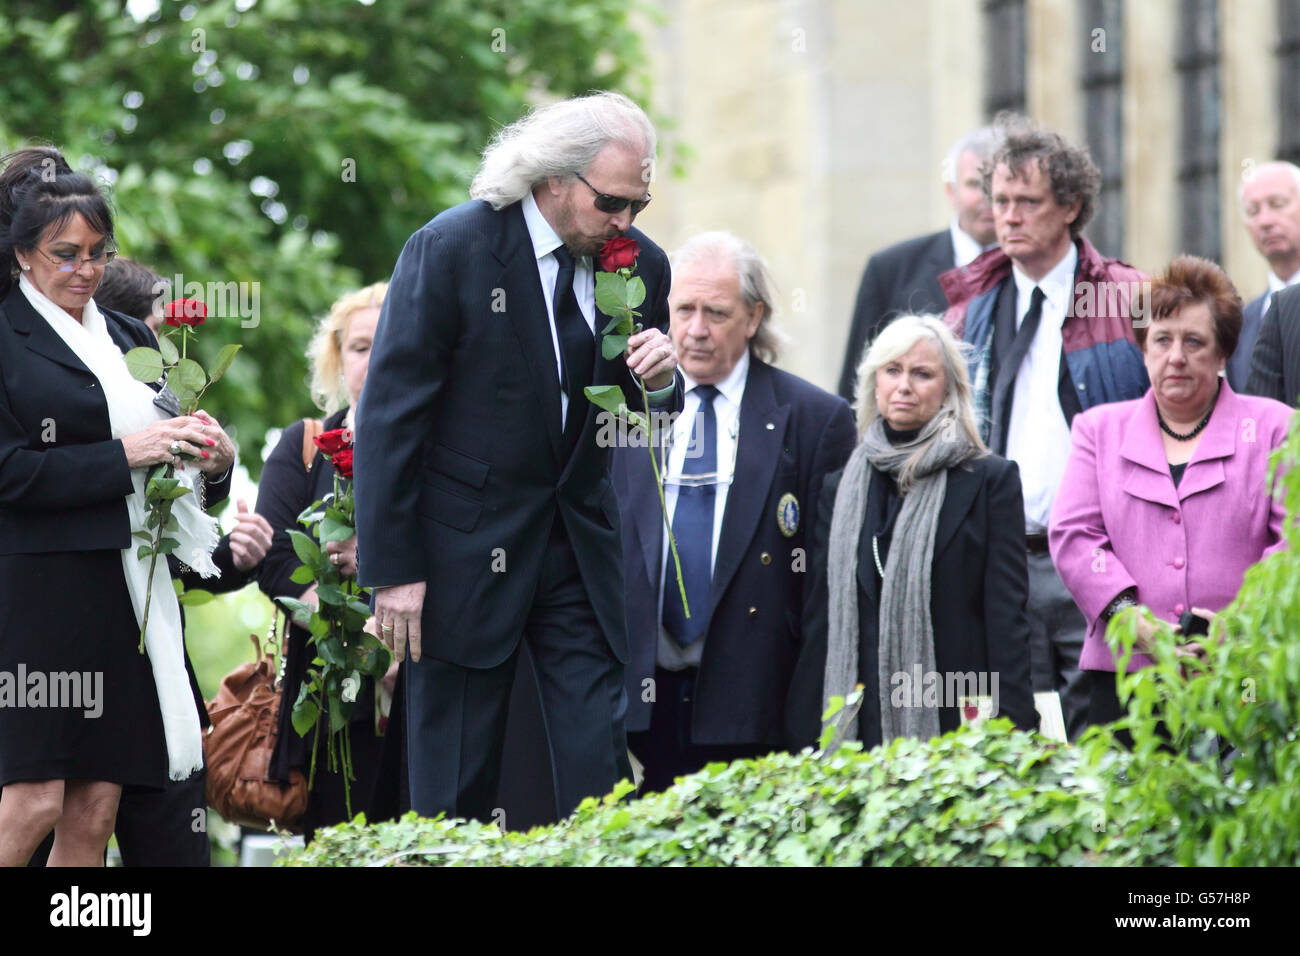 Bee Gee Barry Gibb lays a rose at the funeral of his brother Robin Gibb at St Mary's Church in Thame, Oxfordshire. Stock Photo